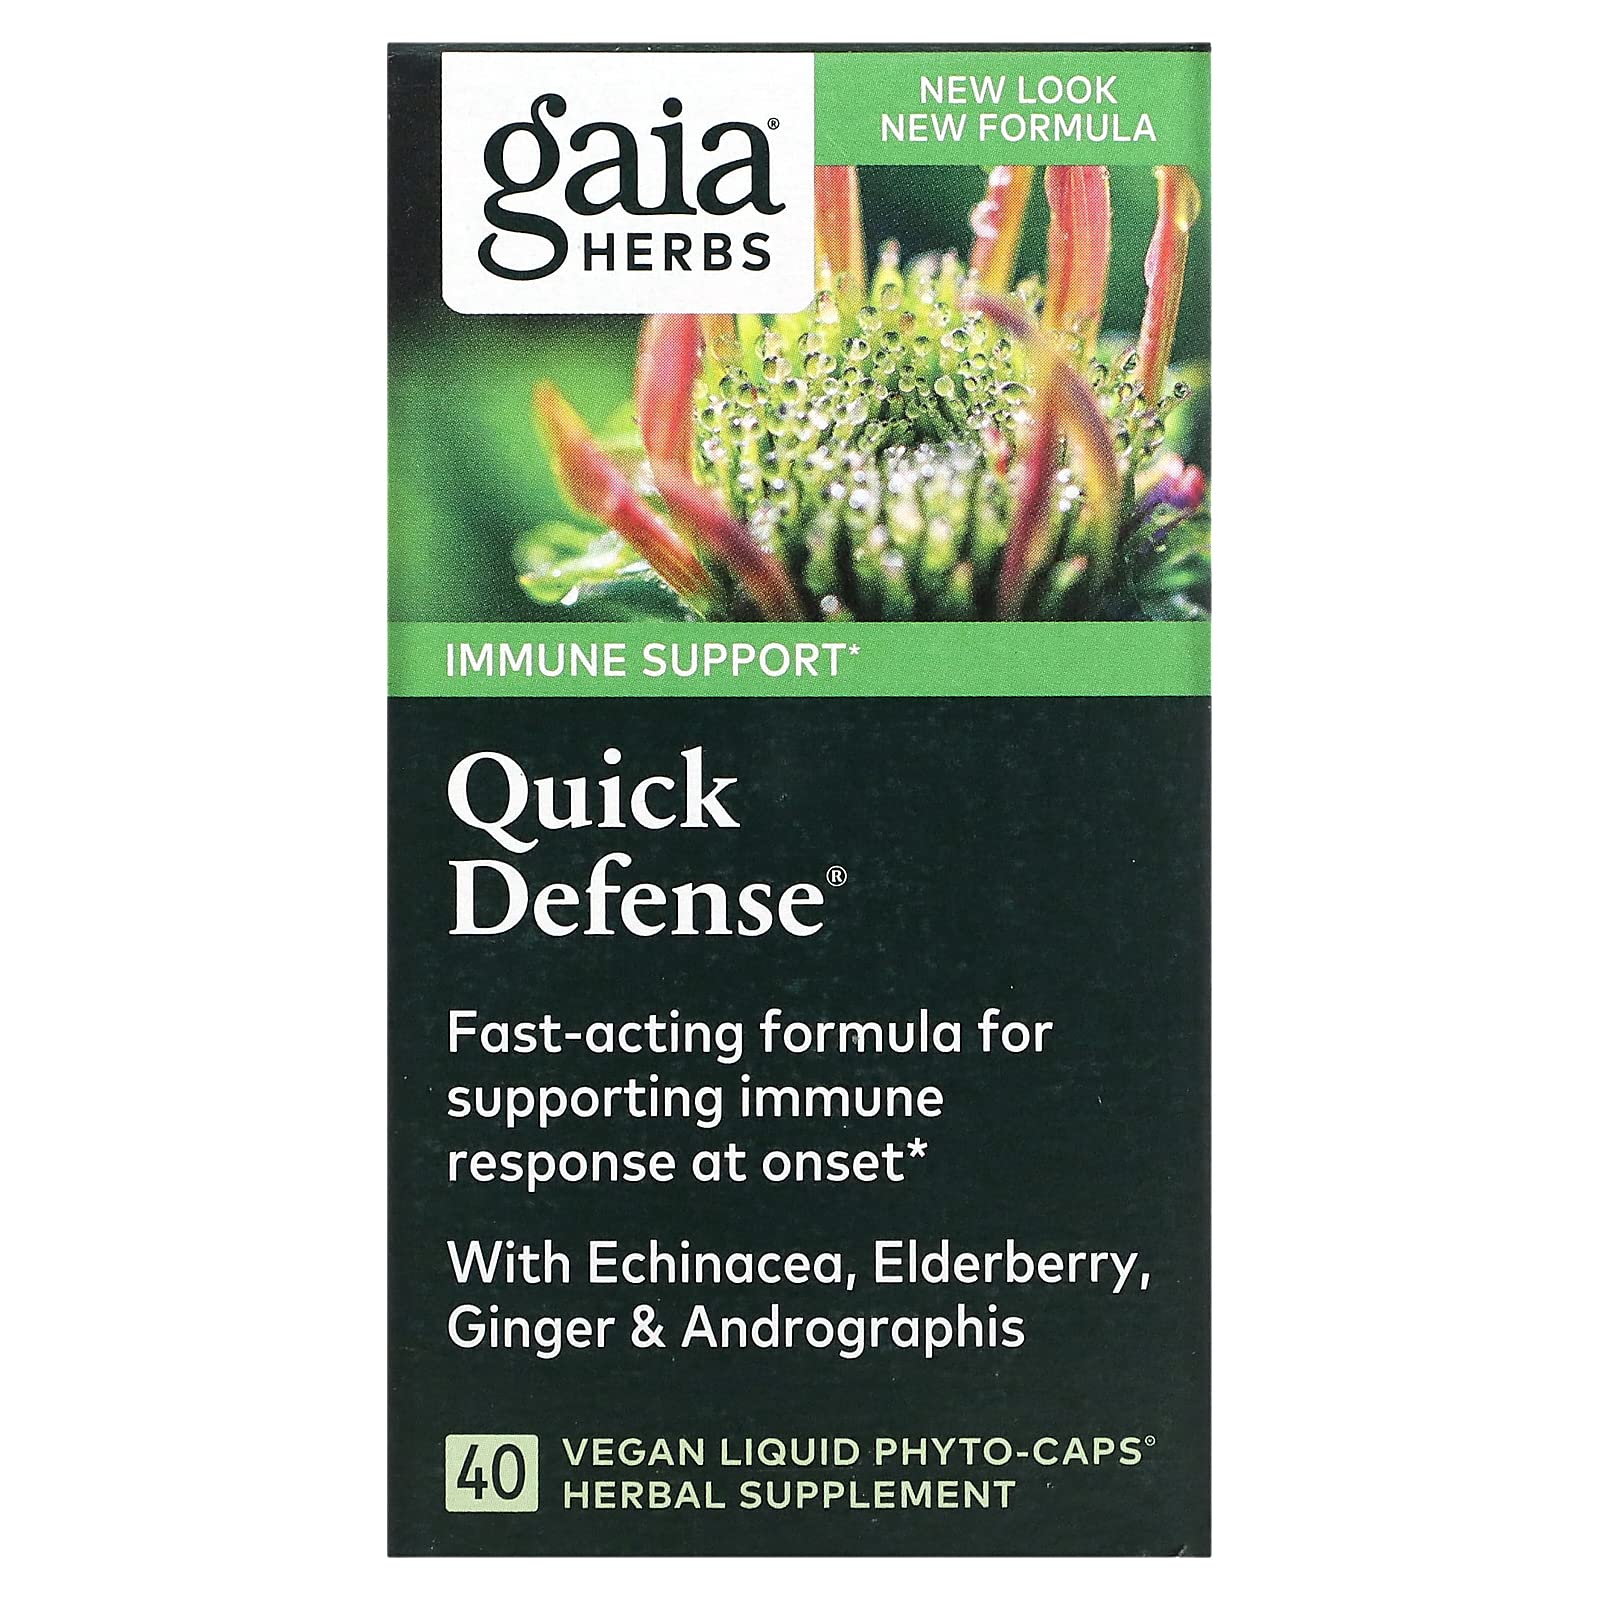 Gaia Herbs Pro Immune Activator - Immune Support Supplement with Elderberry & Ginger - Herbal Supplement & Andrographis Capsules to Aid Immune System & Natural Health Response - 40 Liquid Phyto-Caps